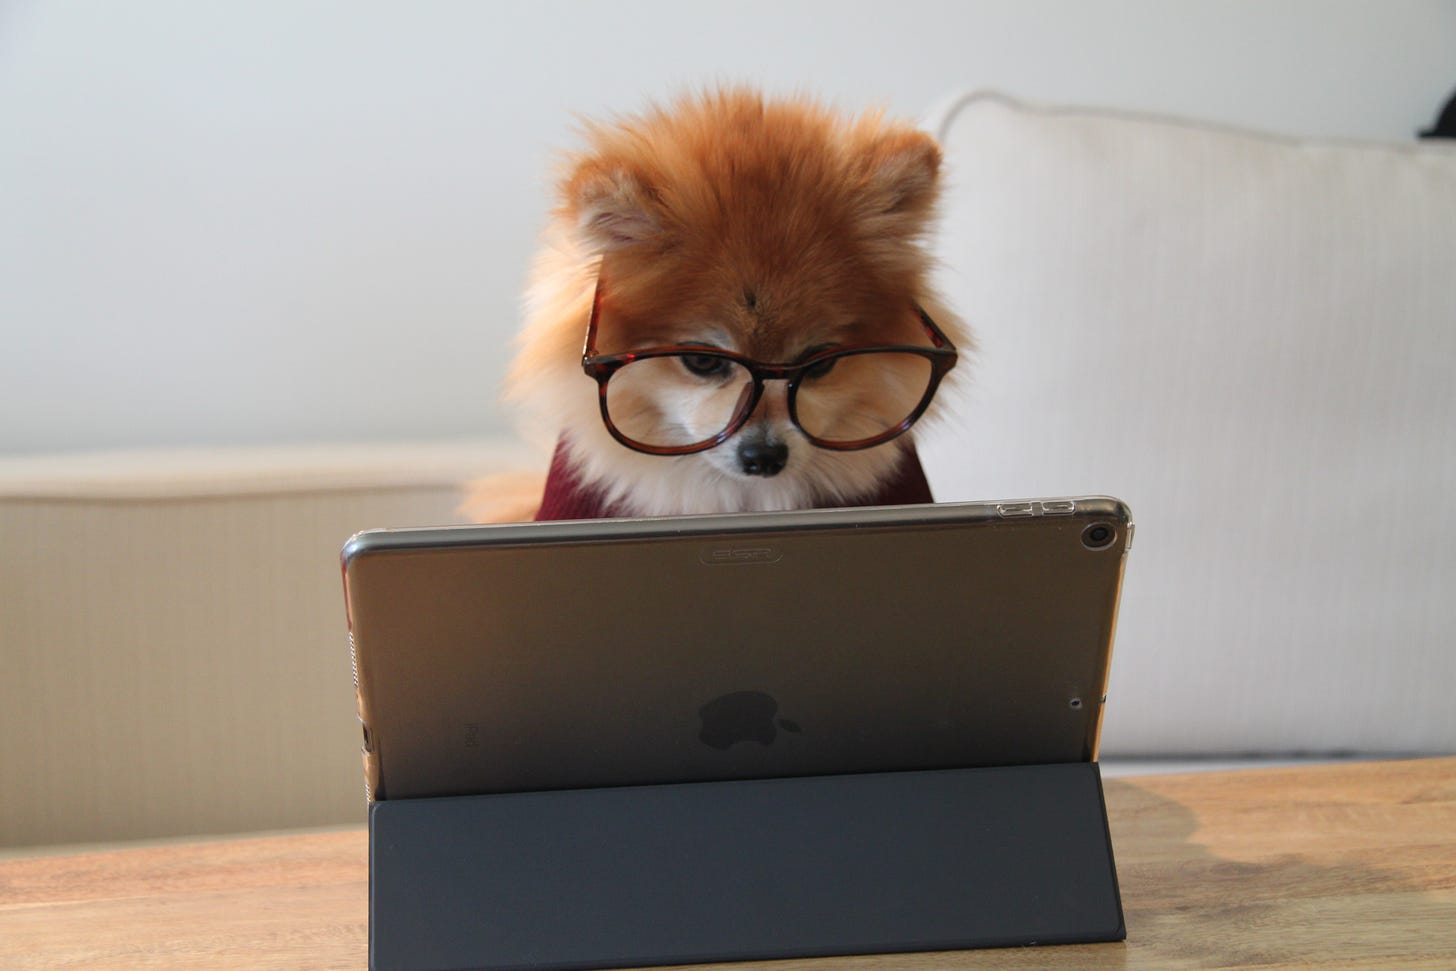 image of dog with glasses focused on laptop computer